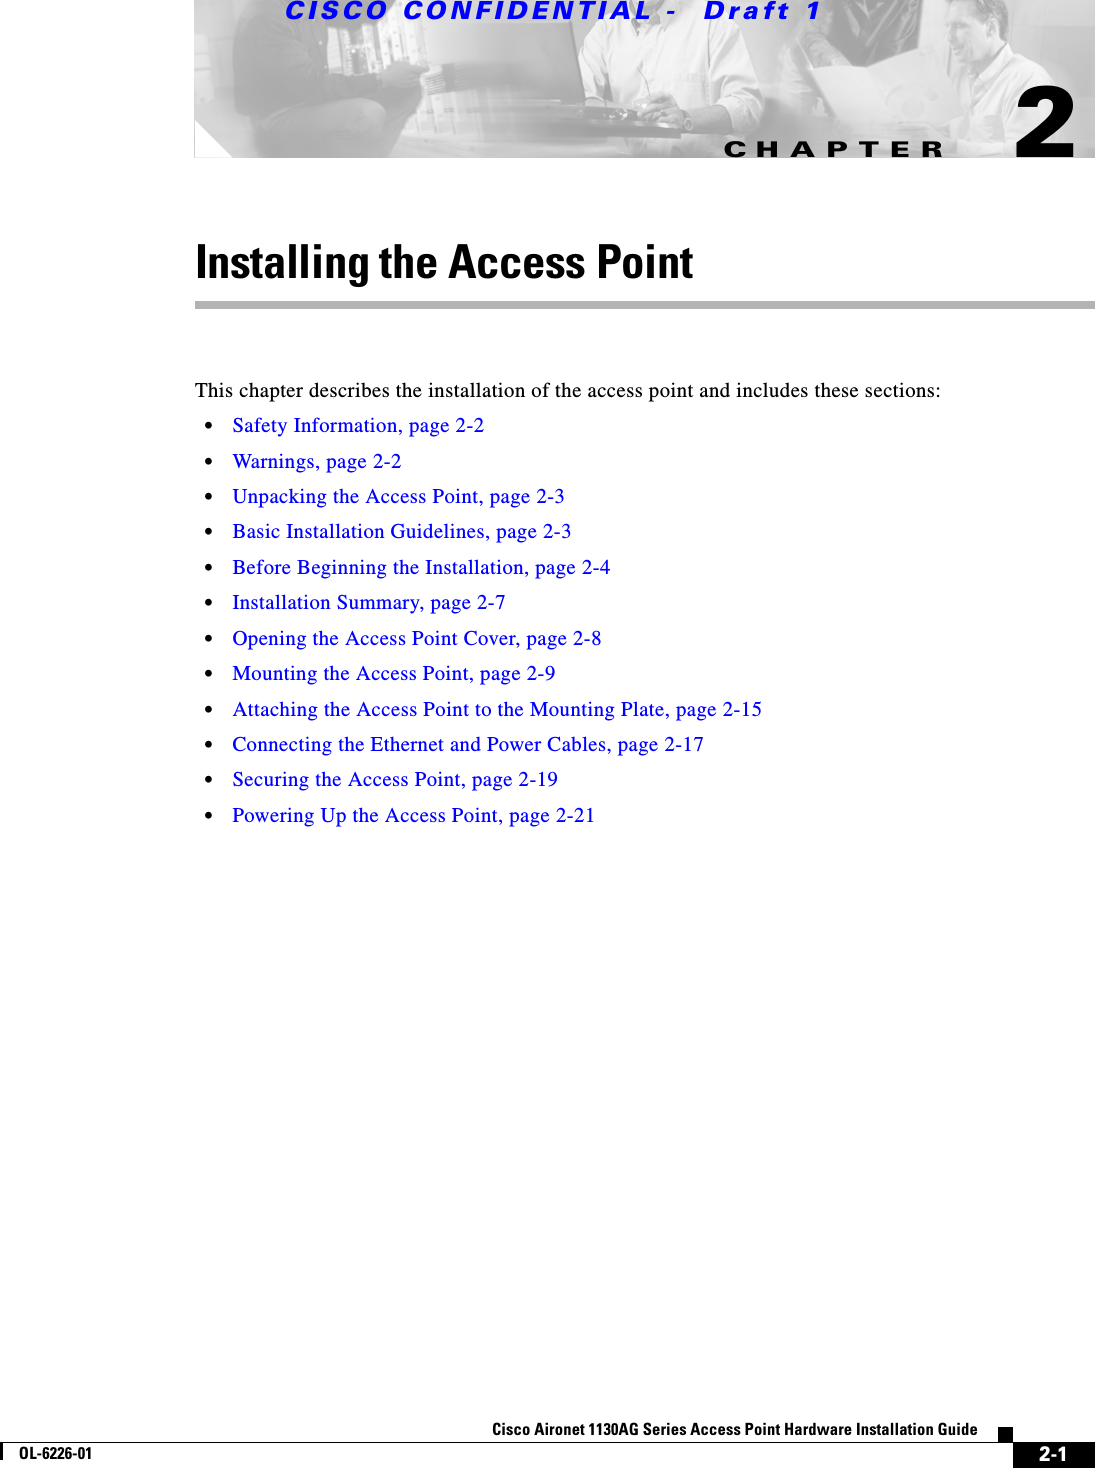 CHAPTER CISCO CONFIDENTIAL -  Draft 12-1Cisco Aironet 1130AG Series Access Point Hardware Installation GuideOL-6226-012Installing the Access PointThis chapter describes the installation of the access point and includes these sections:•Safety Information, page 2-2•Warnings, page 2-2•Unpacking the Access Point, page 2-3•Basic Installation Guidelines, page 2-3•Before Beginning the Installation, page 2-4•Installation Summary, page 2-7•Opening the Access Point Cover, page 2-8•Mounting the Access Point, page 2-9•Attaching the Access Point to the Mounting Plate, page 2-15•Connecting the Ethernet and Power Cables, page 2-17•Securing the Access Point, page 2-19•Powering Up the Access Point, page 2-21